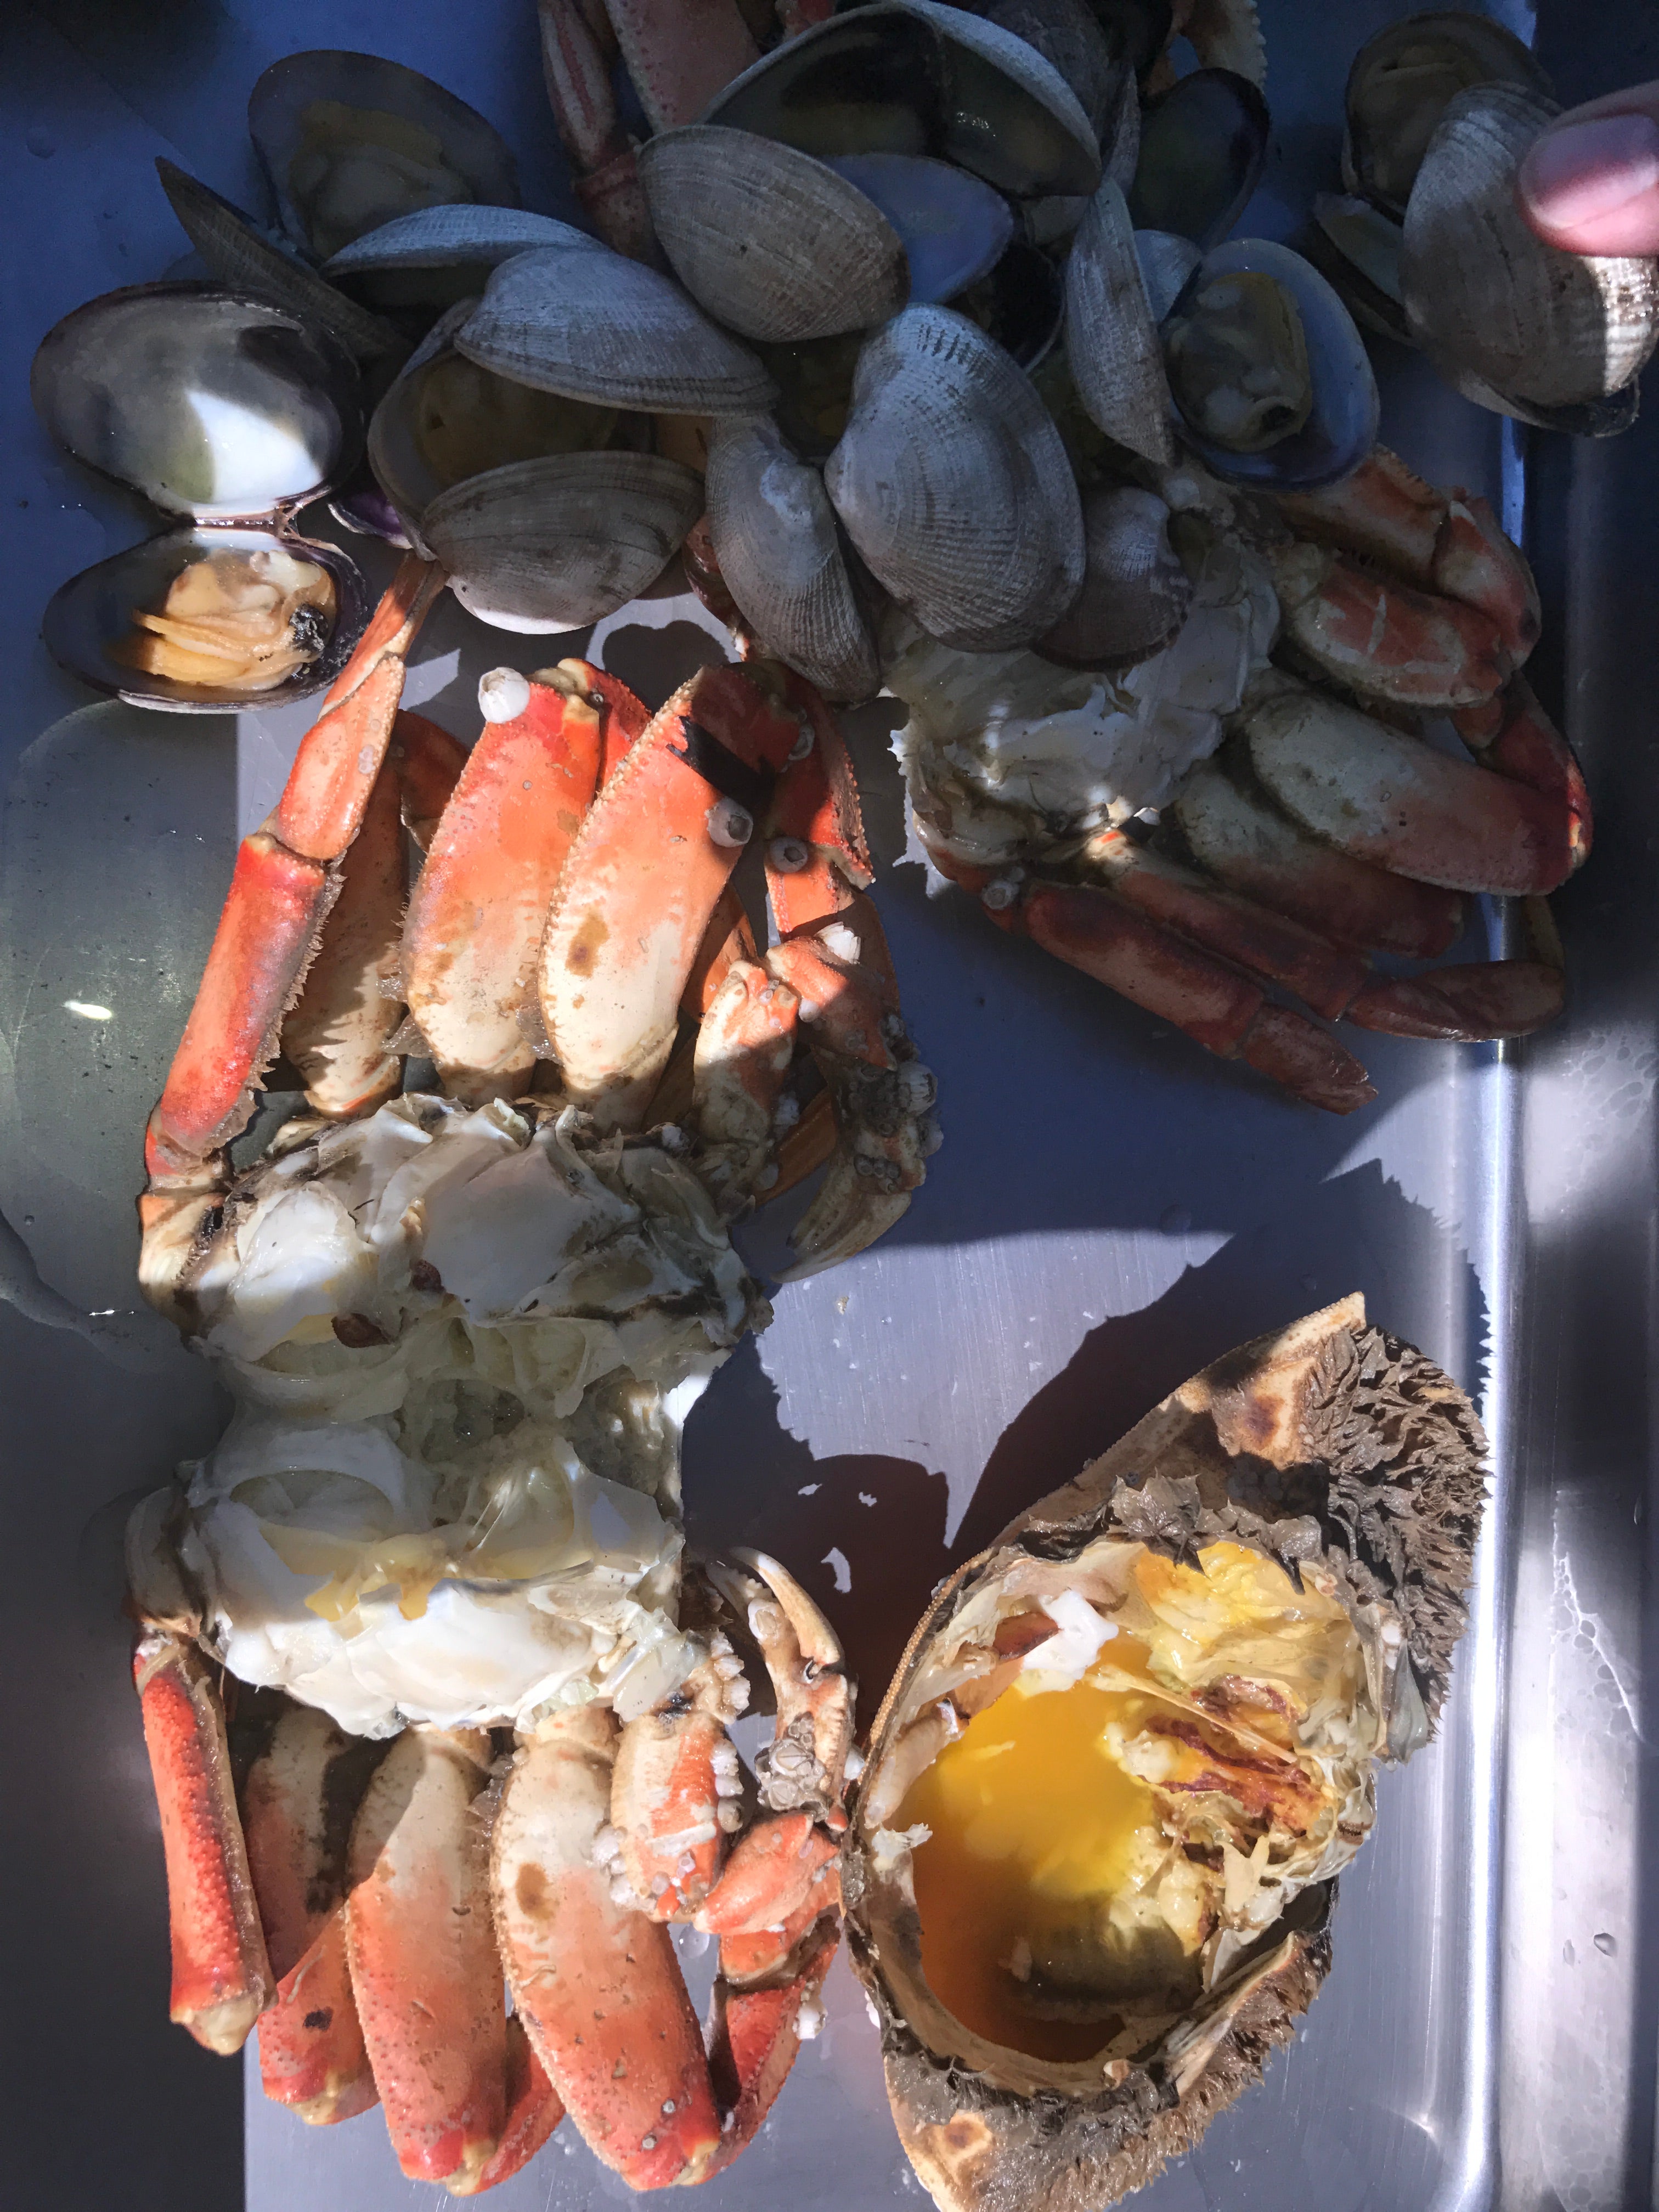 Fresh caught crabs and clams!